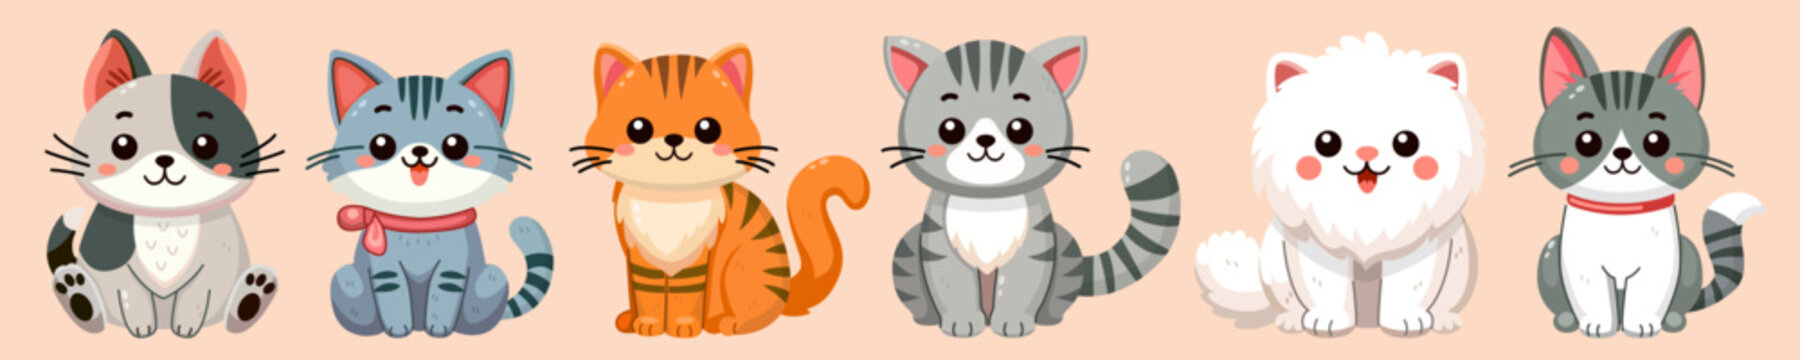 Naklejki Cute and smile cats set, doodle pets friends. Collection of funny adorable cats or fluffy kittens cartoon character design with flat color. Pets companions friendship. Illustration for sticker, print.